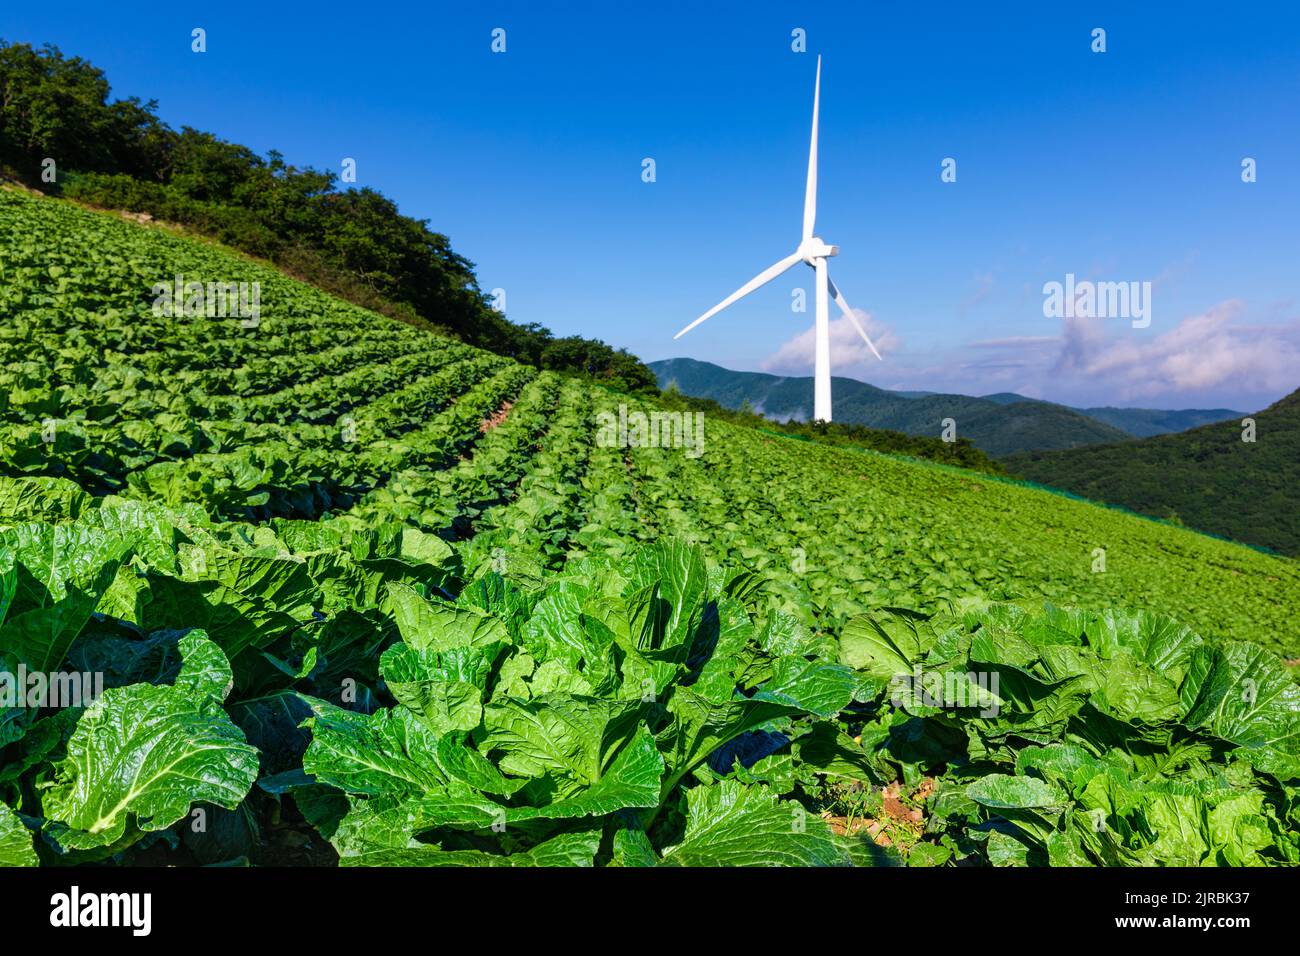 Cabbage field landscape of green vegetables grown in a beautiful alpine area illuminated by the morning sun. Taebaek-si, Gangwon-do, South Korea. Stock Photo